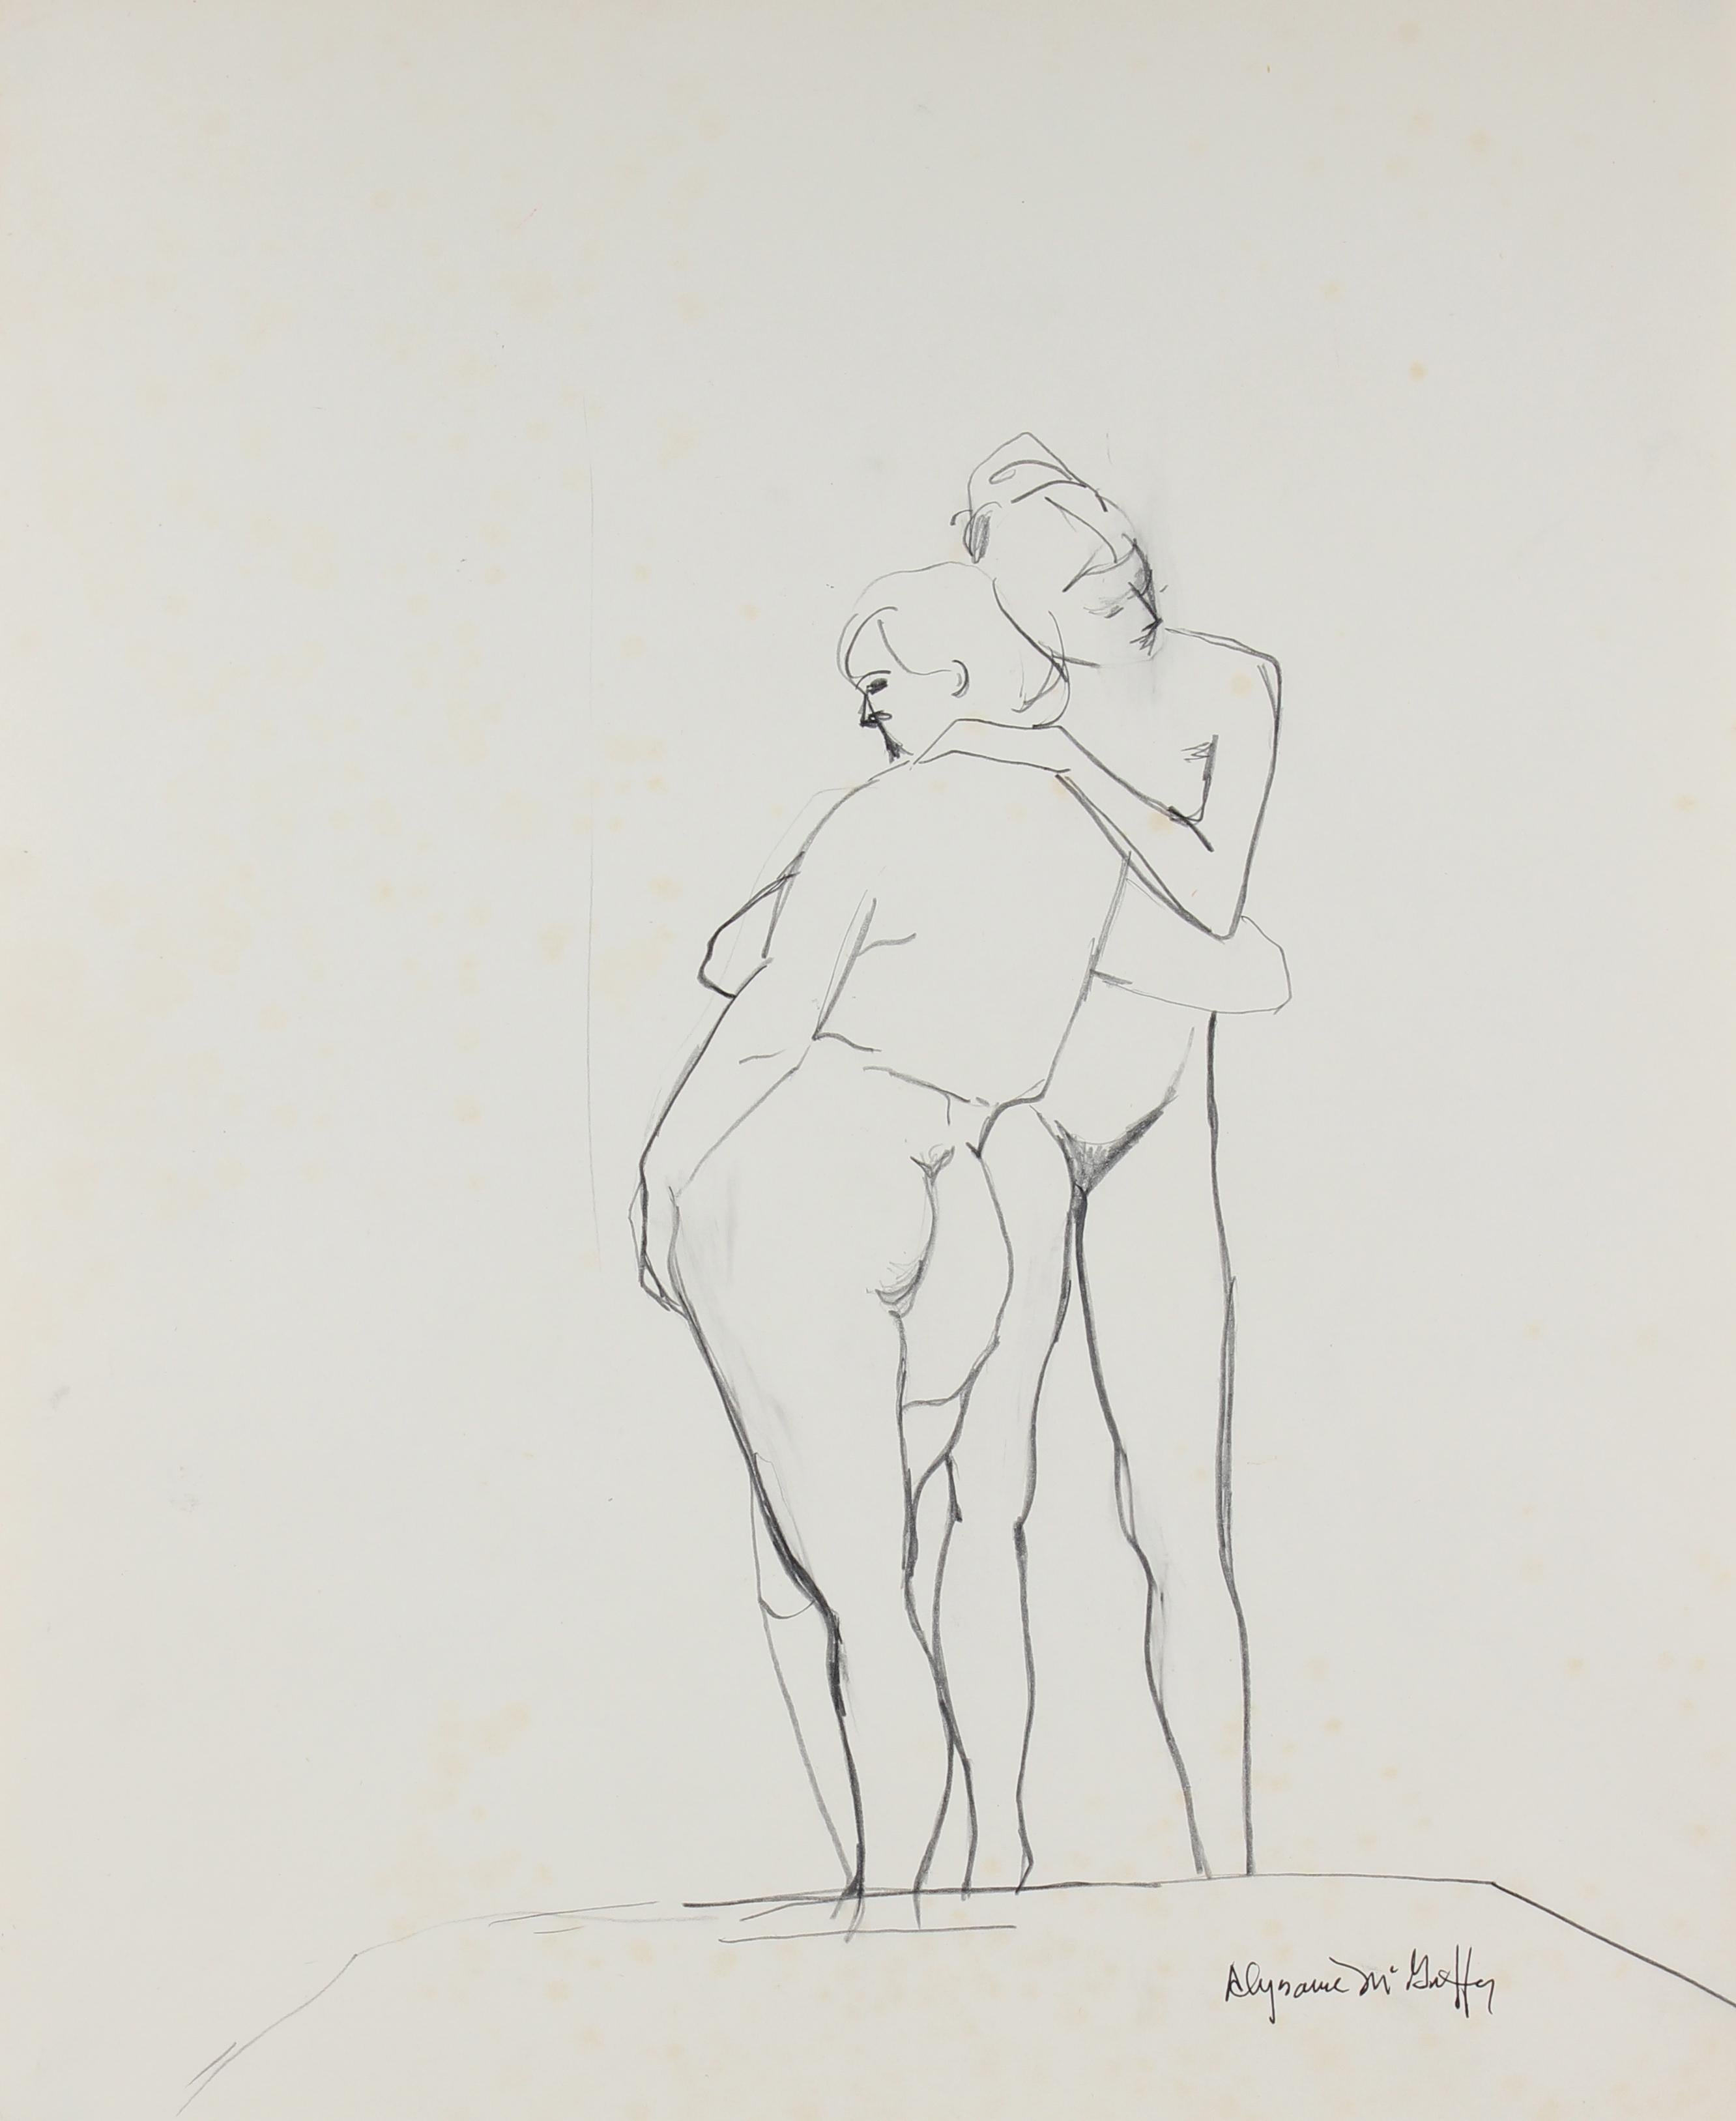 Nude Figures Embracing 1950-60s Charcoal & Graphite - Art by Alysanne McGaffey